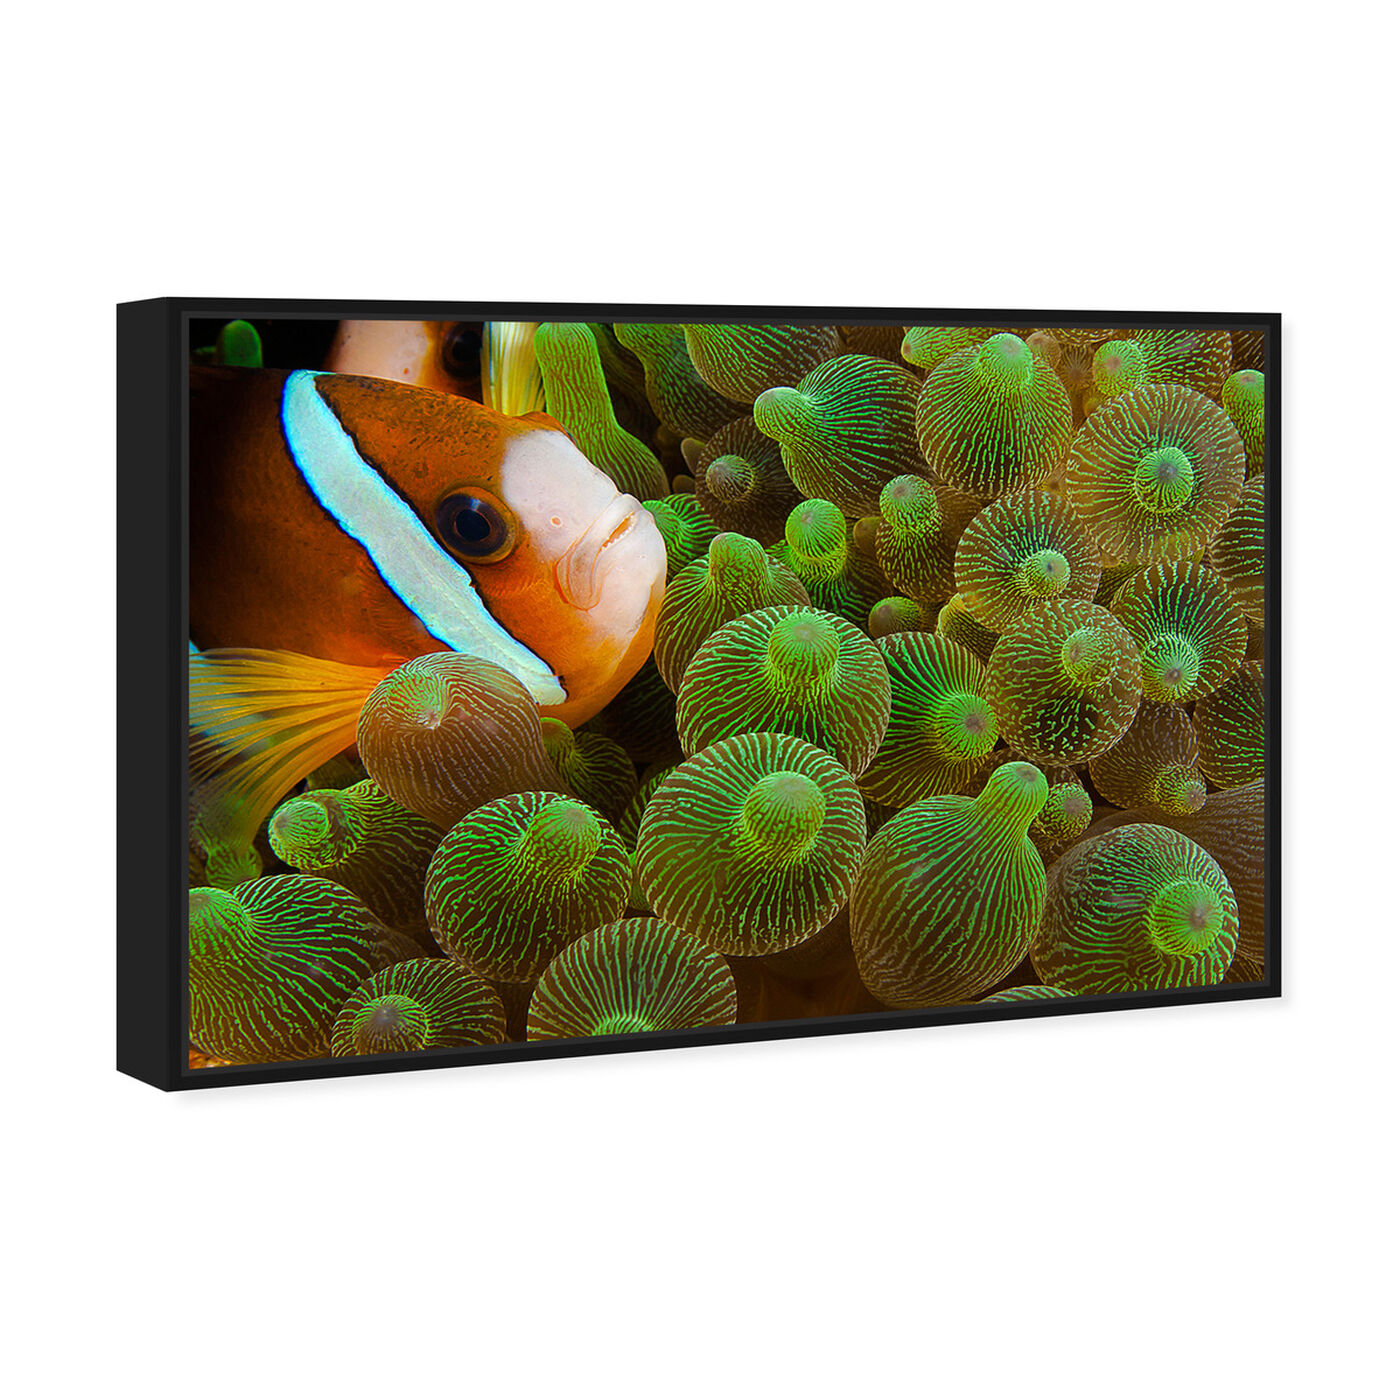 Angled view of Clarks Anemonefish by David Fleetham featuring nautical and coastal and marine life art.